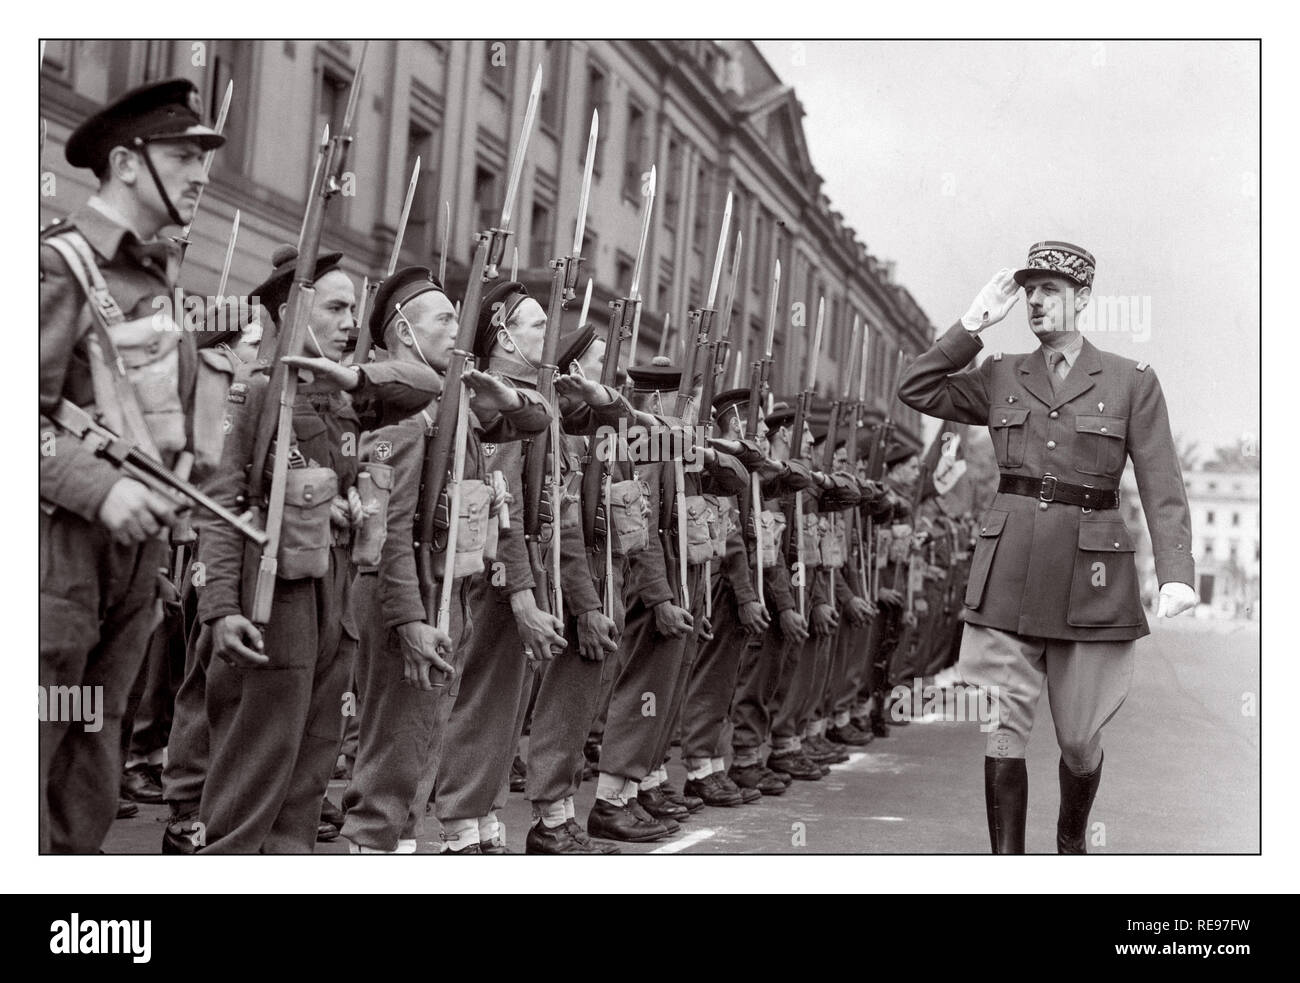 FREE FRENCH WW2 Propaganda Image of General Charles de Gaulle in exile during World War II saluting Free French Commando Unit Troops in London in 1942 on Bastille Day Stock Photo